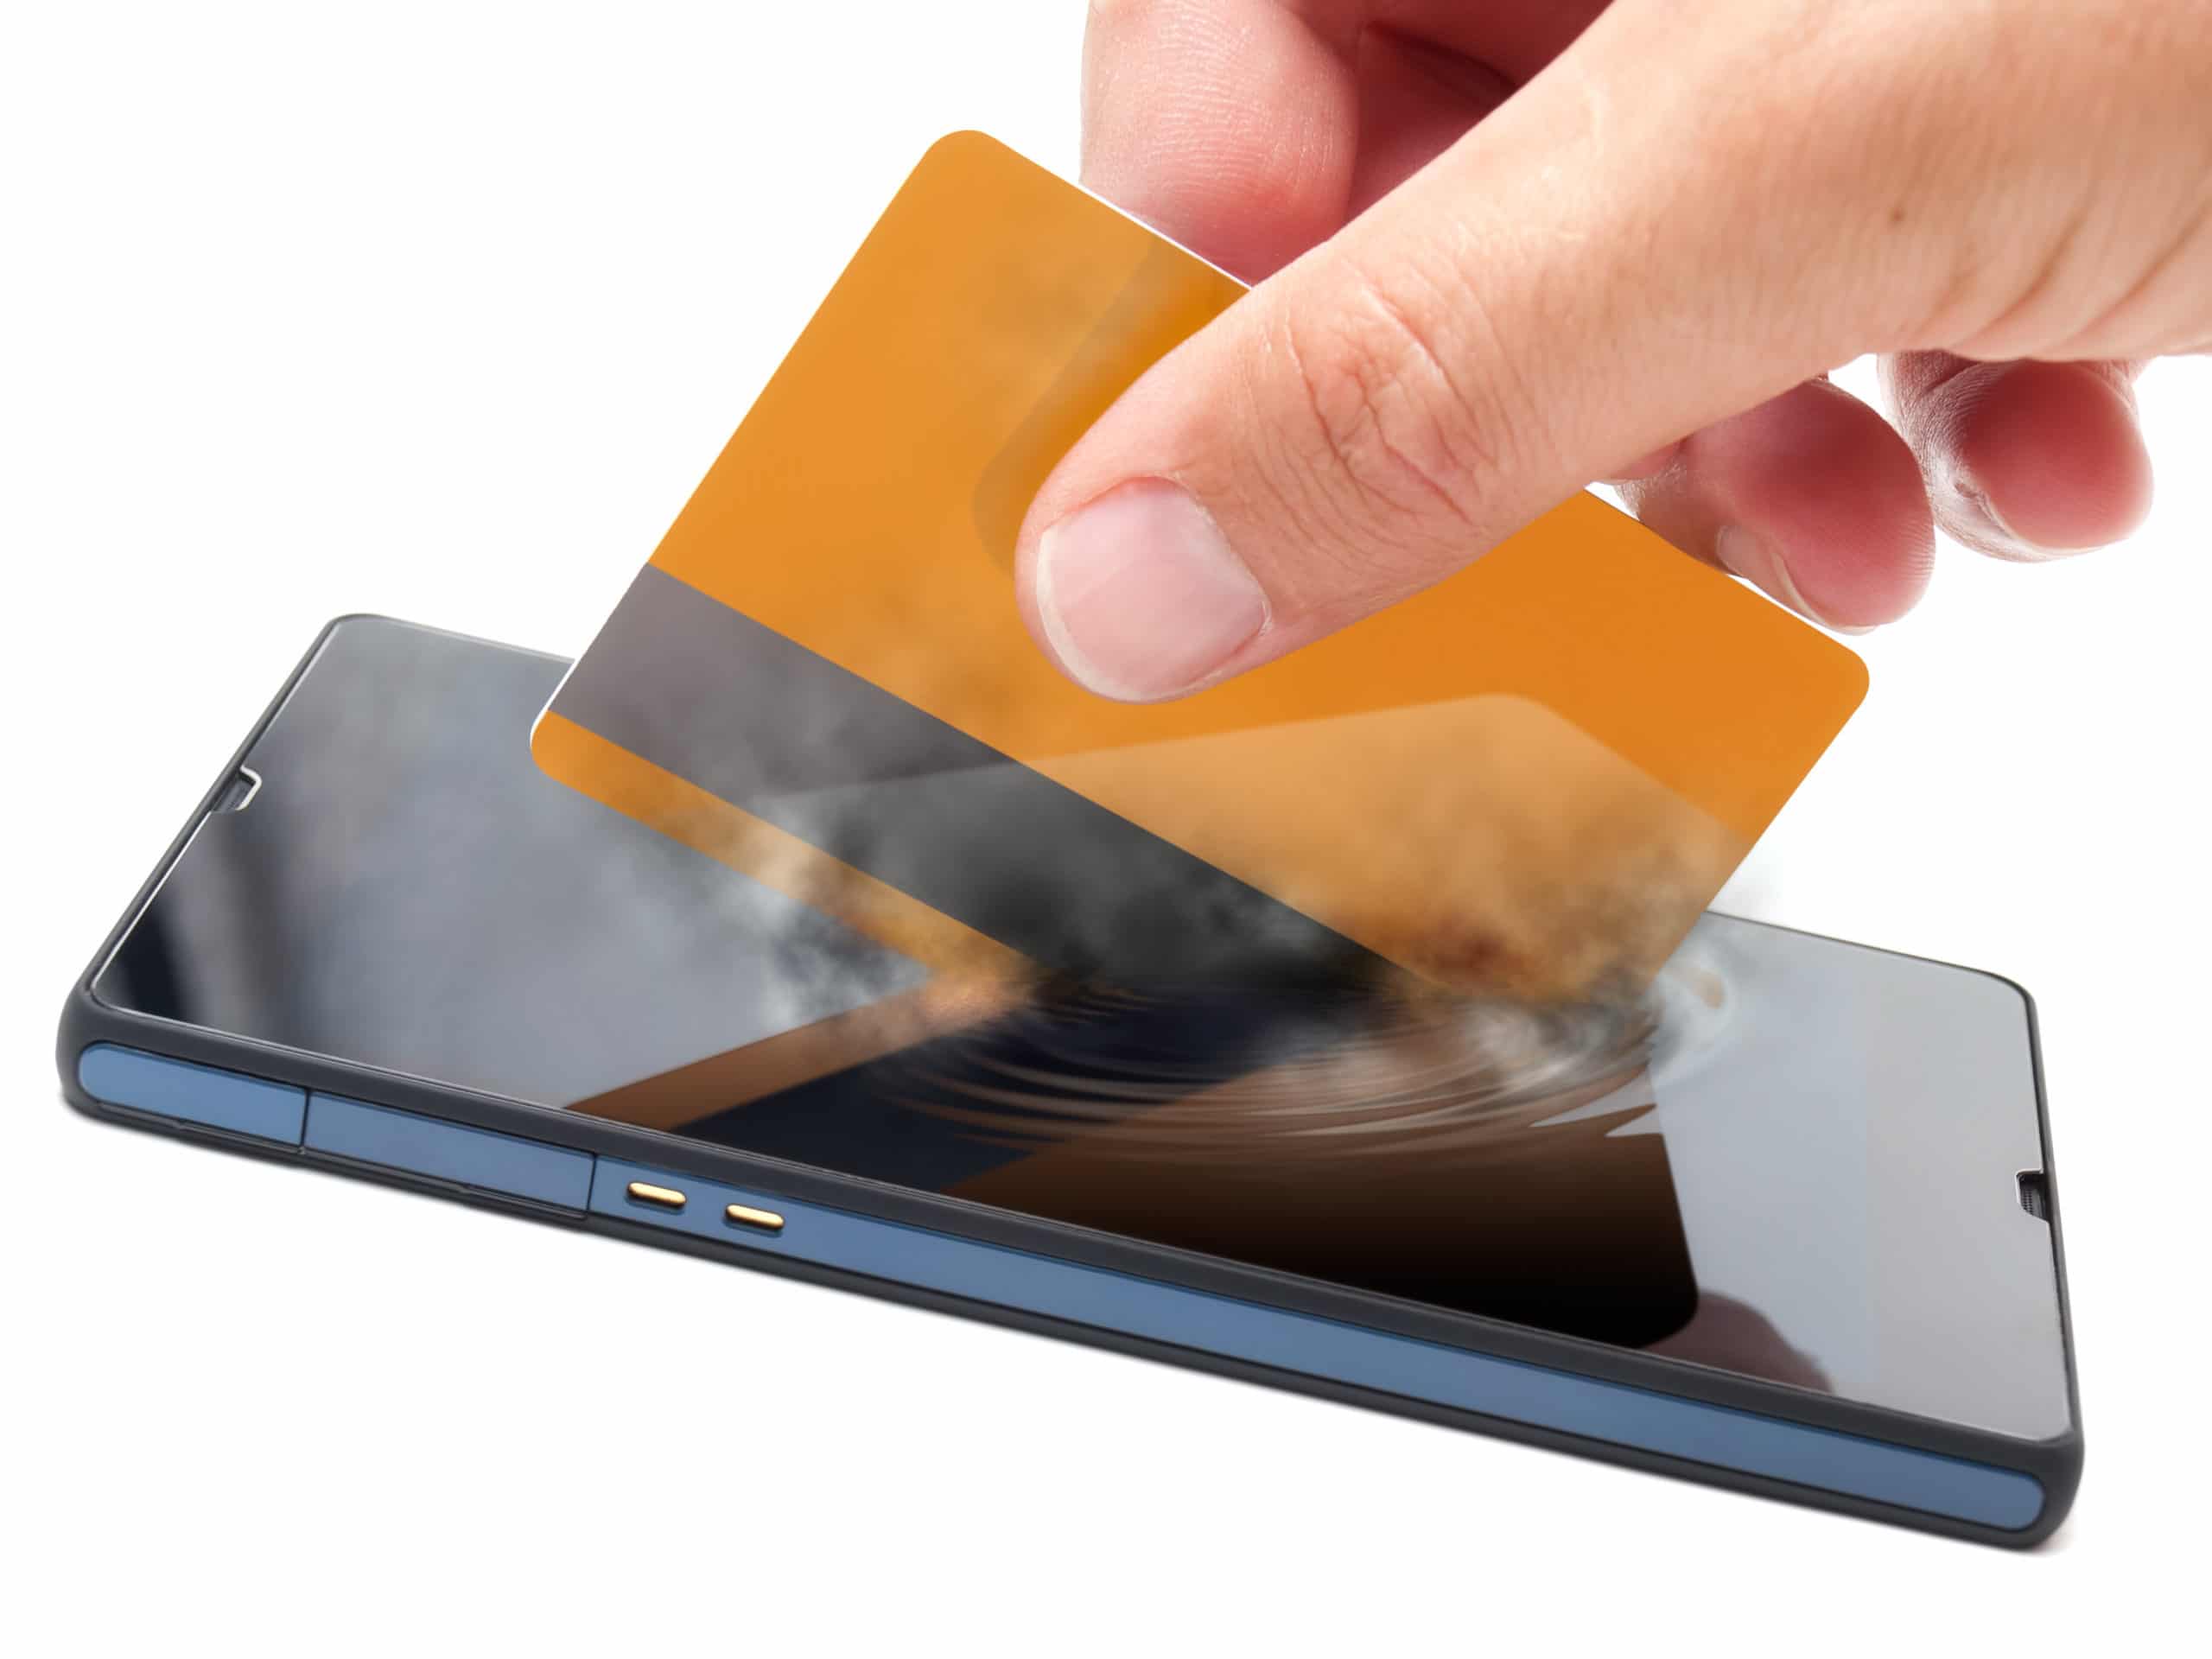 Transactions: Fiserv partners with Wedge for payment capabilities